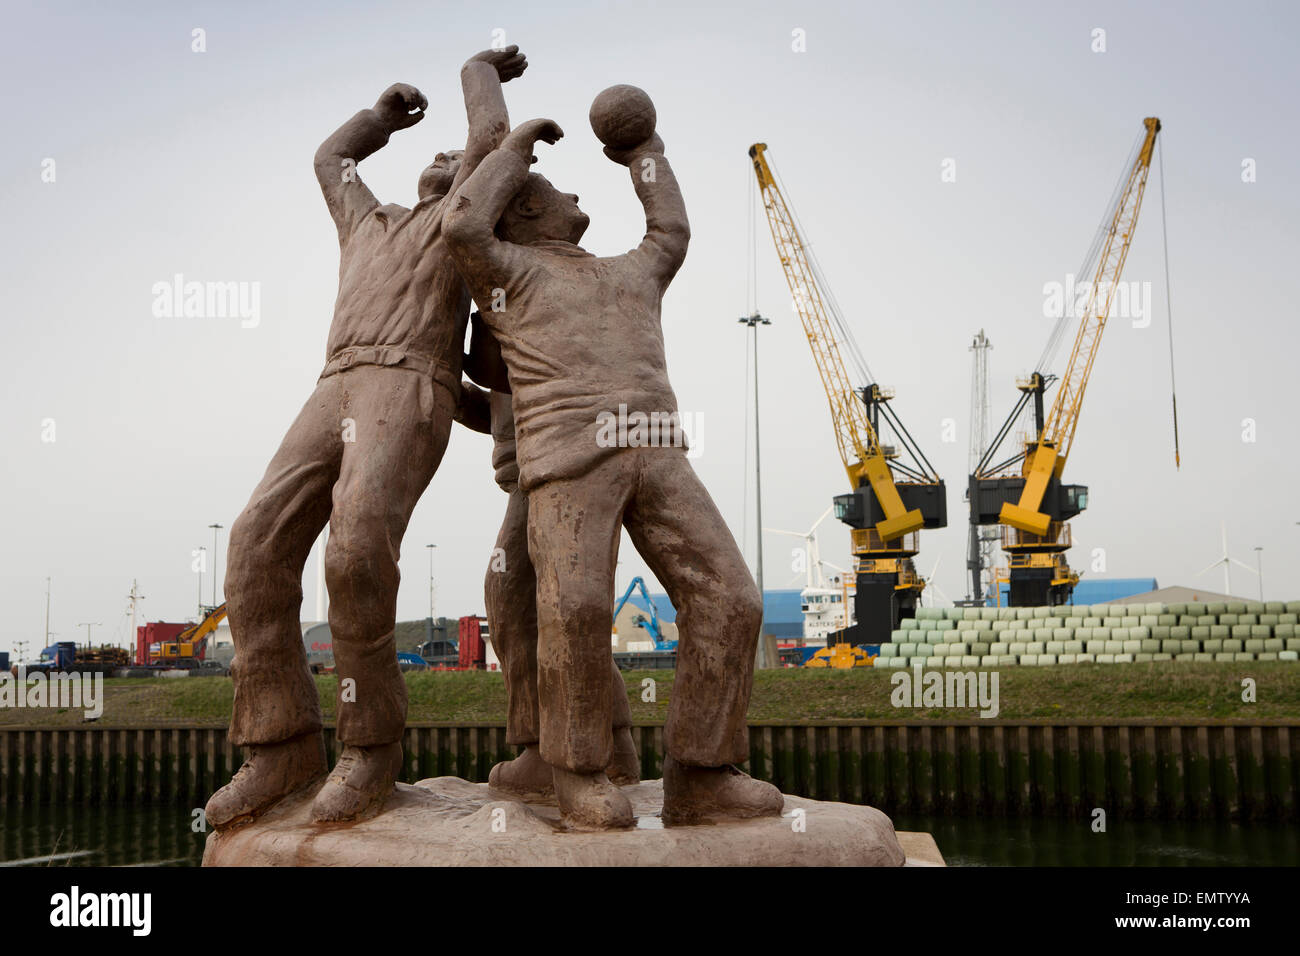 UK, Cumbria, Workington, harbour, Uppies and Downies traditional local ball game statue Stock Photo